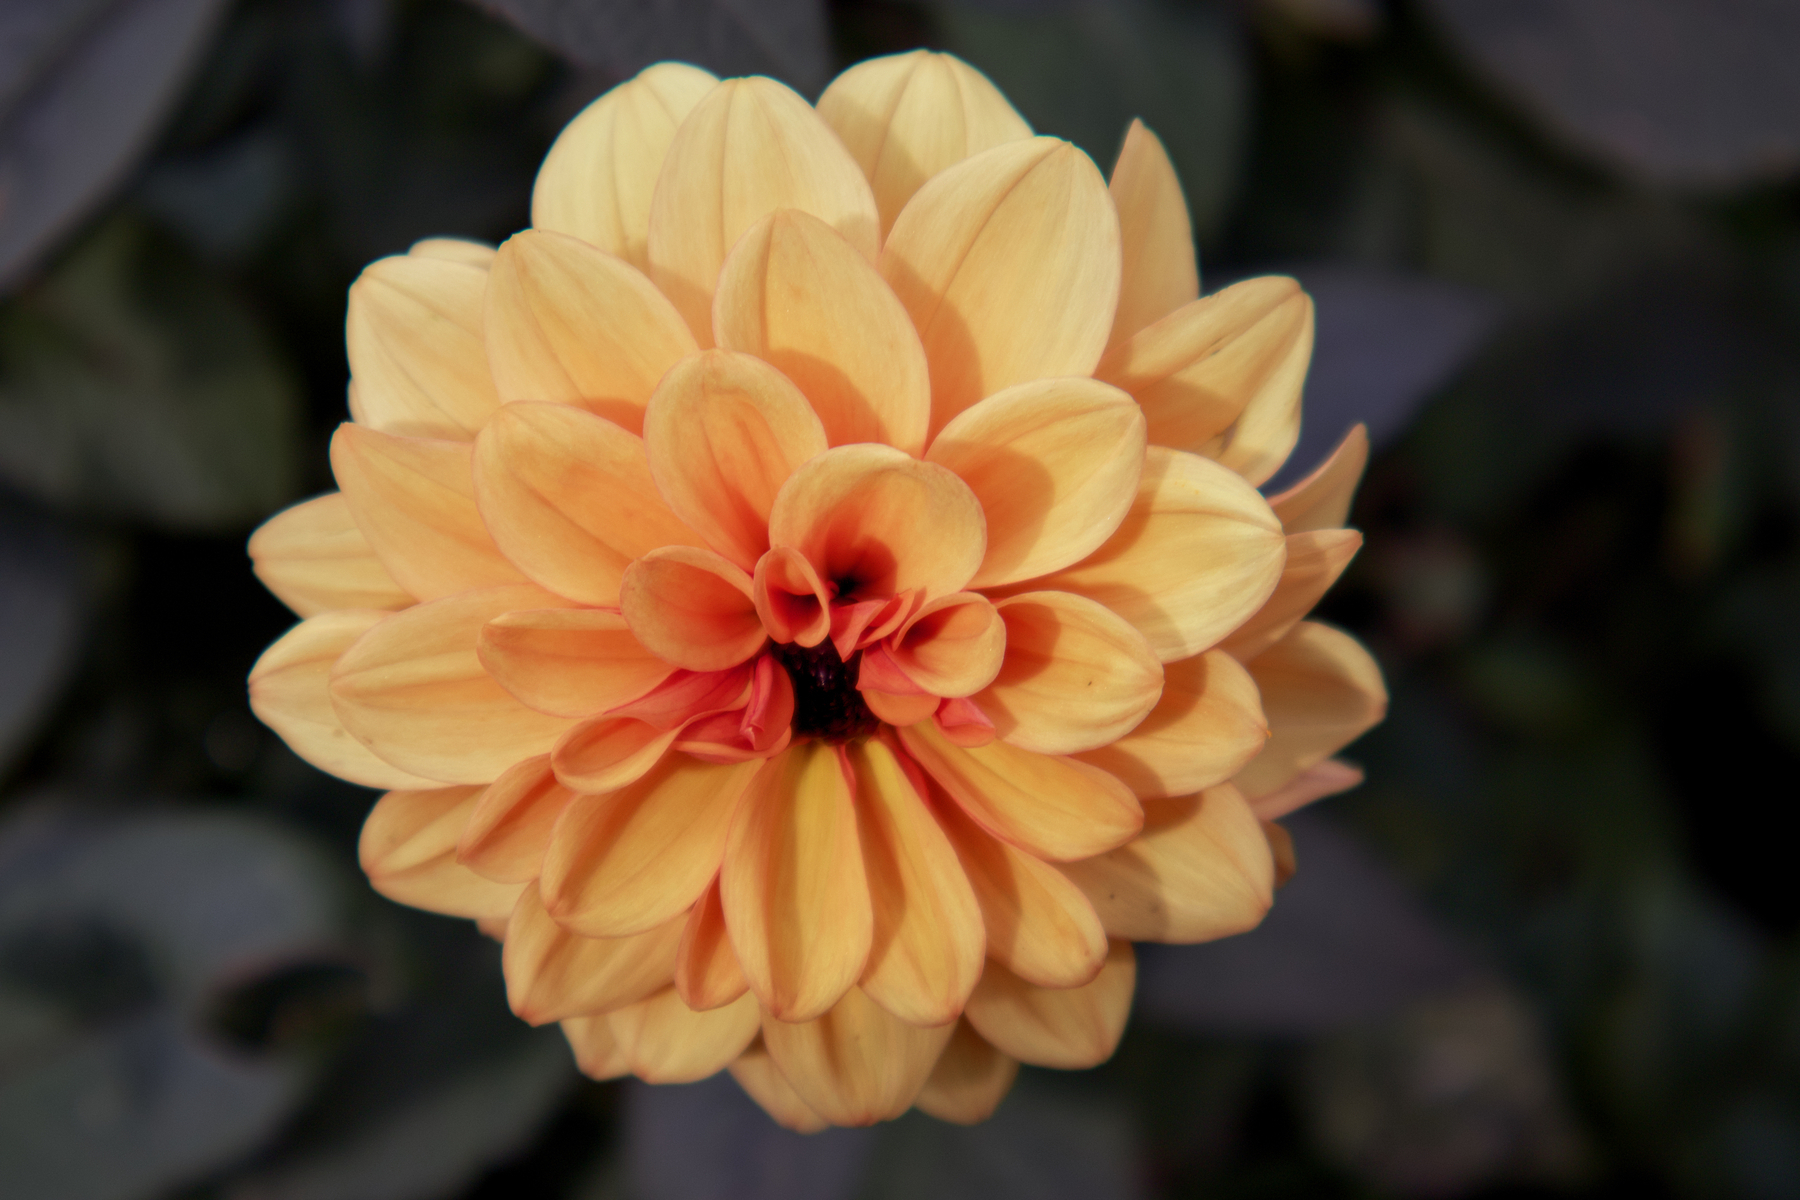 Another flower in the garden at Nymans, this time a yellow-orange one. 